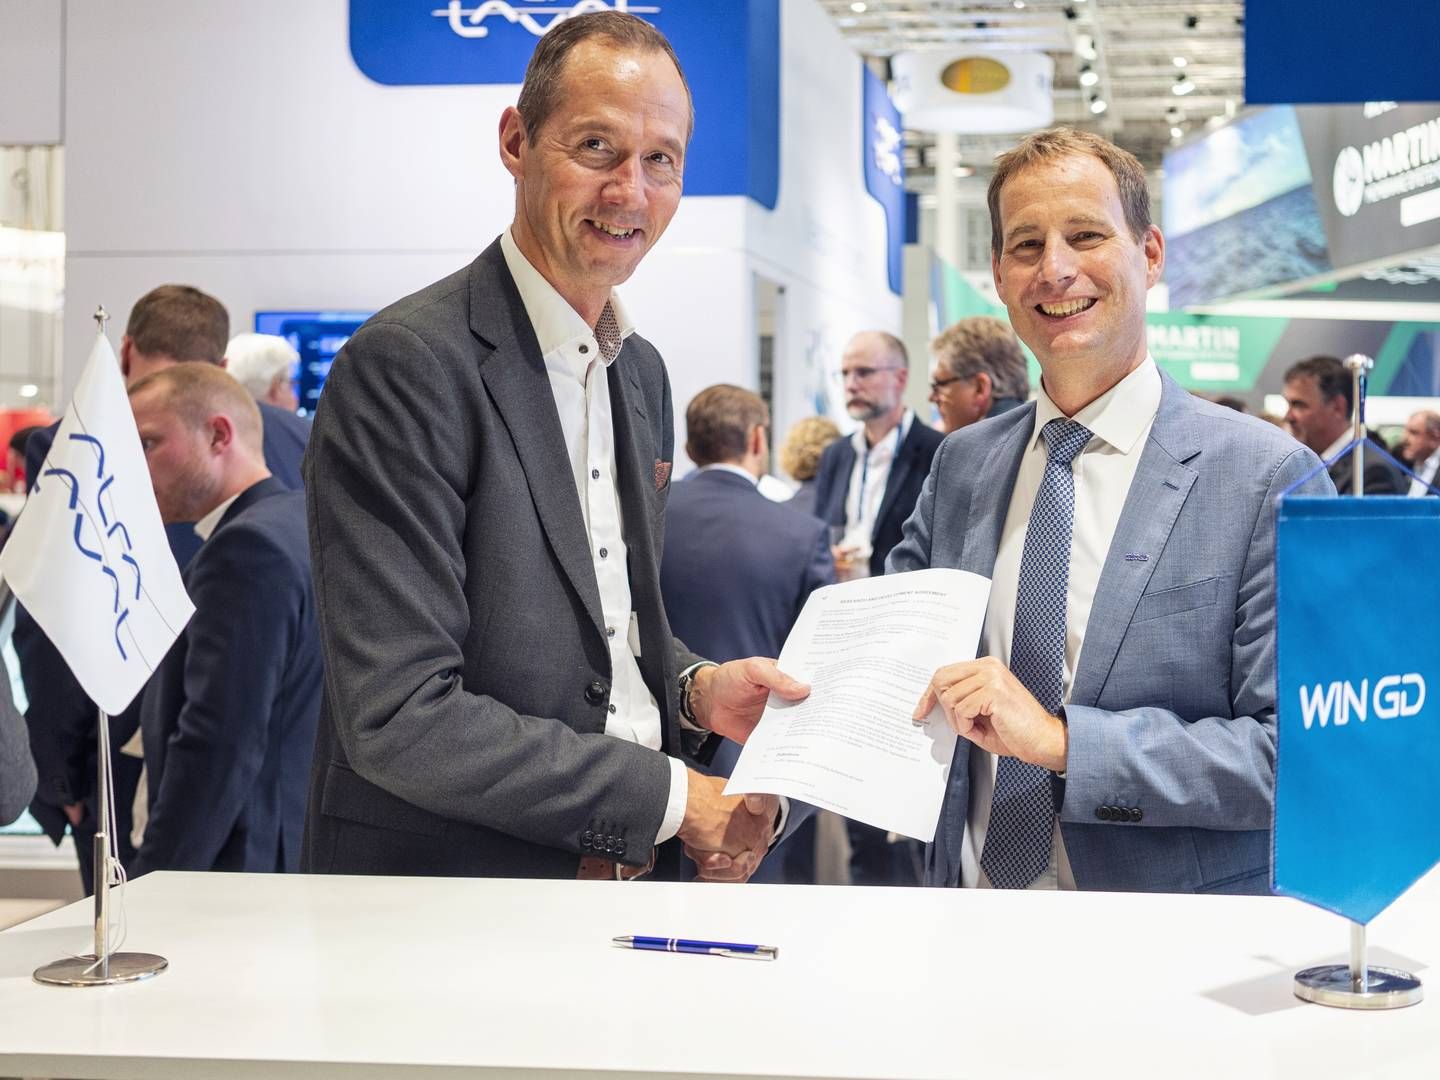 Peter Nielsen of Alfa Laval (left) and Dominik Schneiter of WinGD present their new agreement. | Photo: Alfa Laval / WinGD